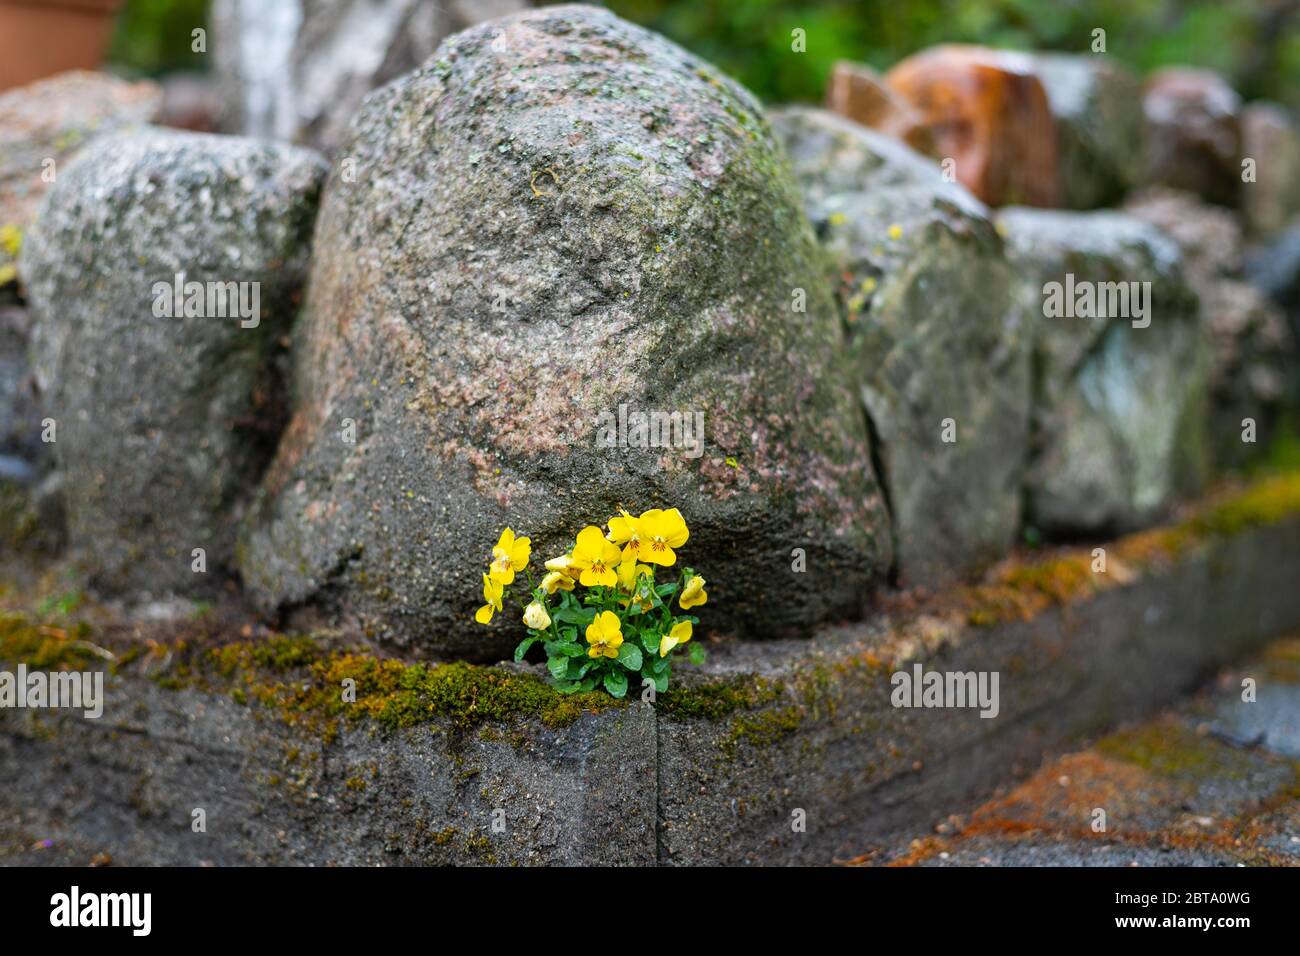 A  California golden violet (Viola pedunculata) grows between stones and sticks out in a rain shower Stock Photo